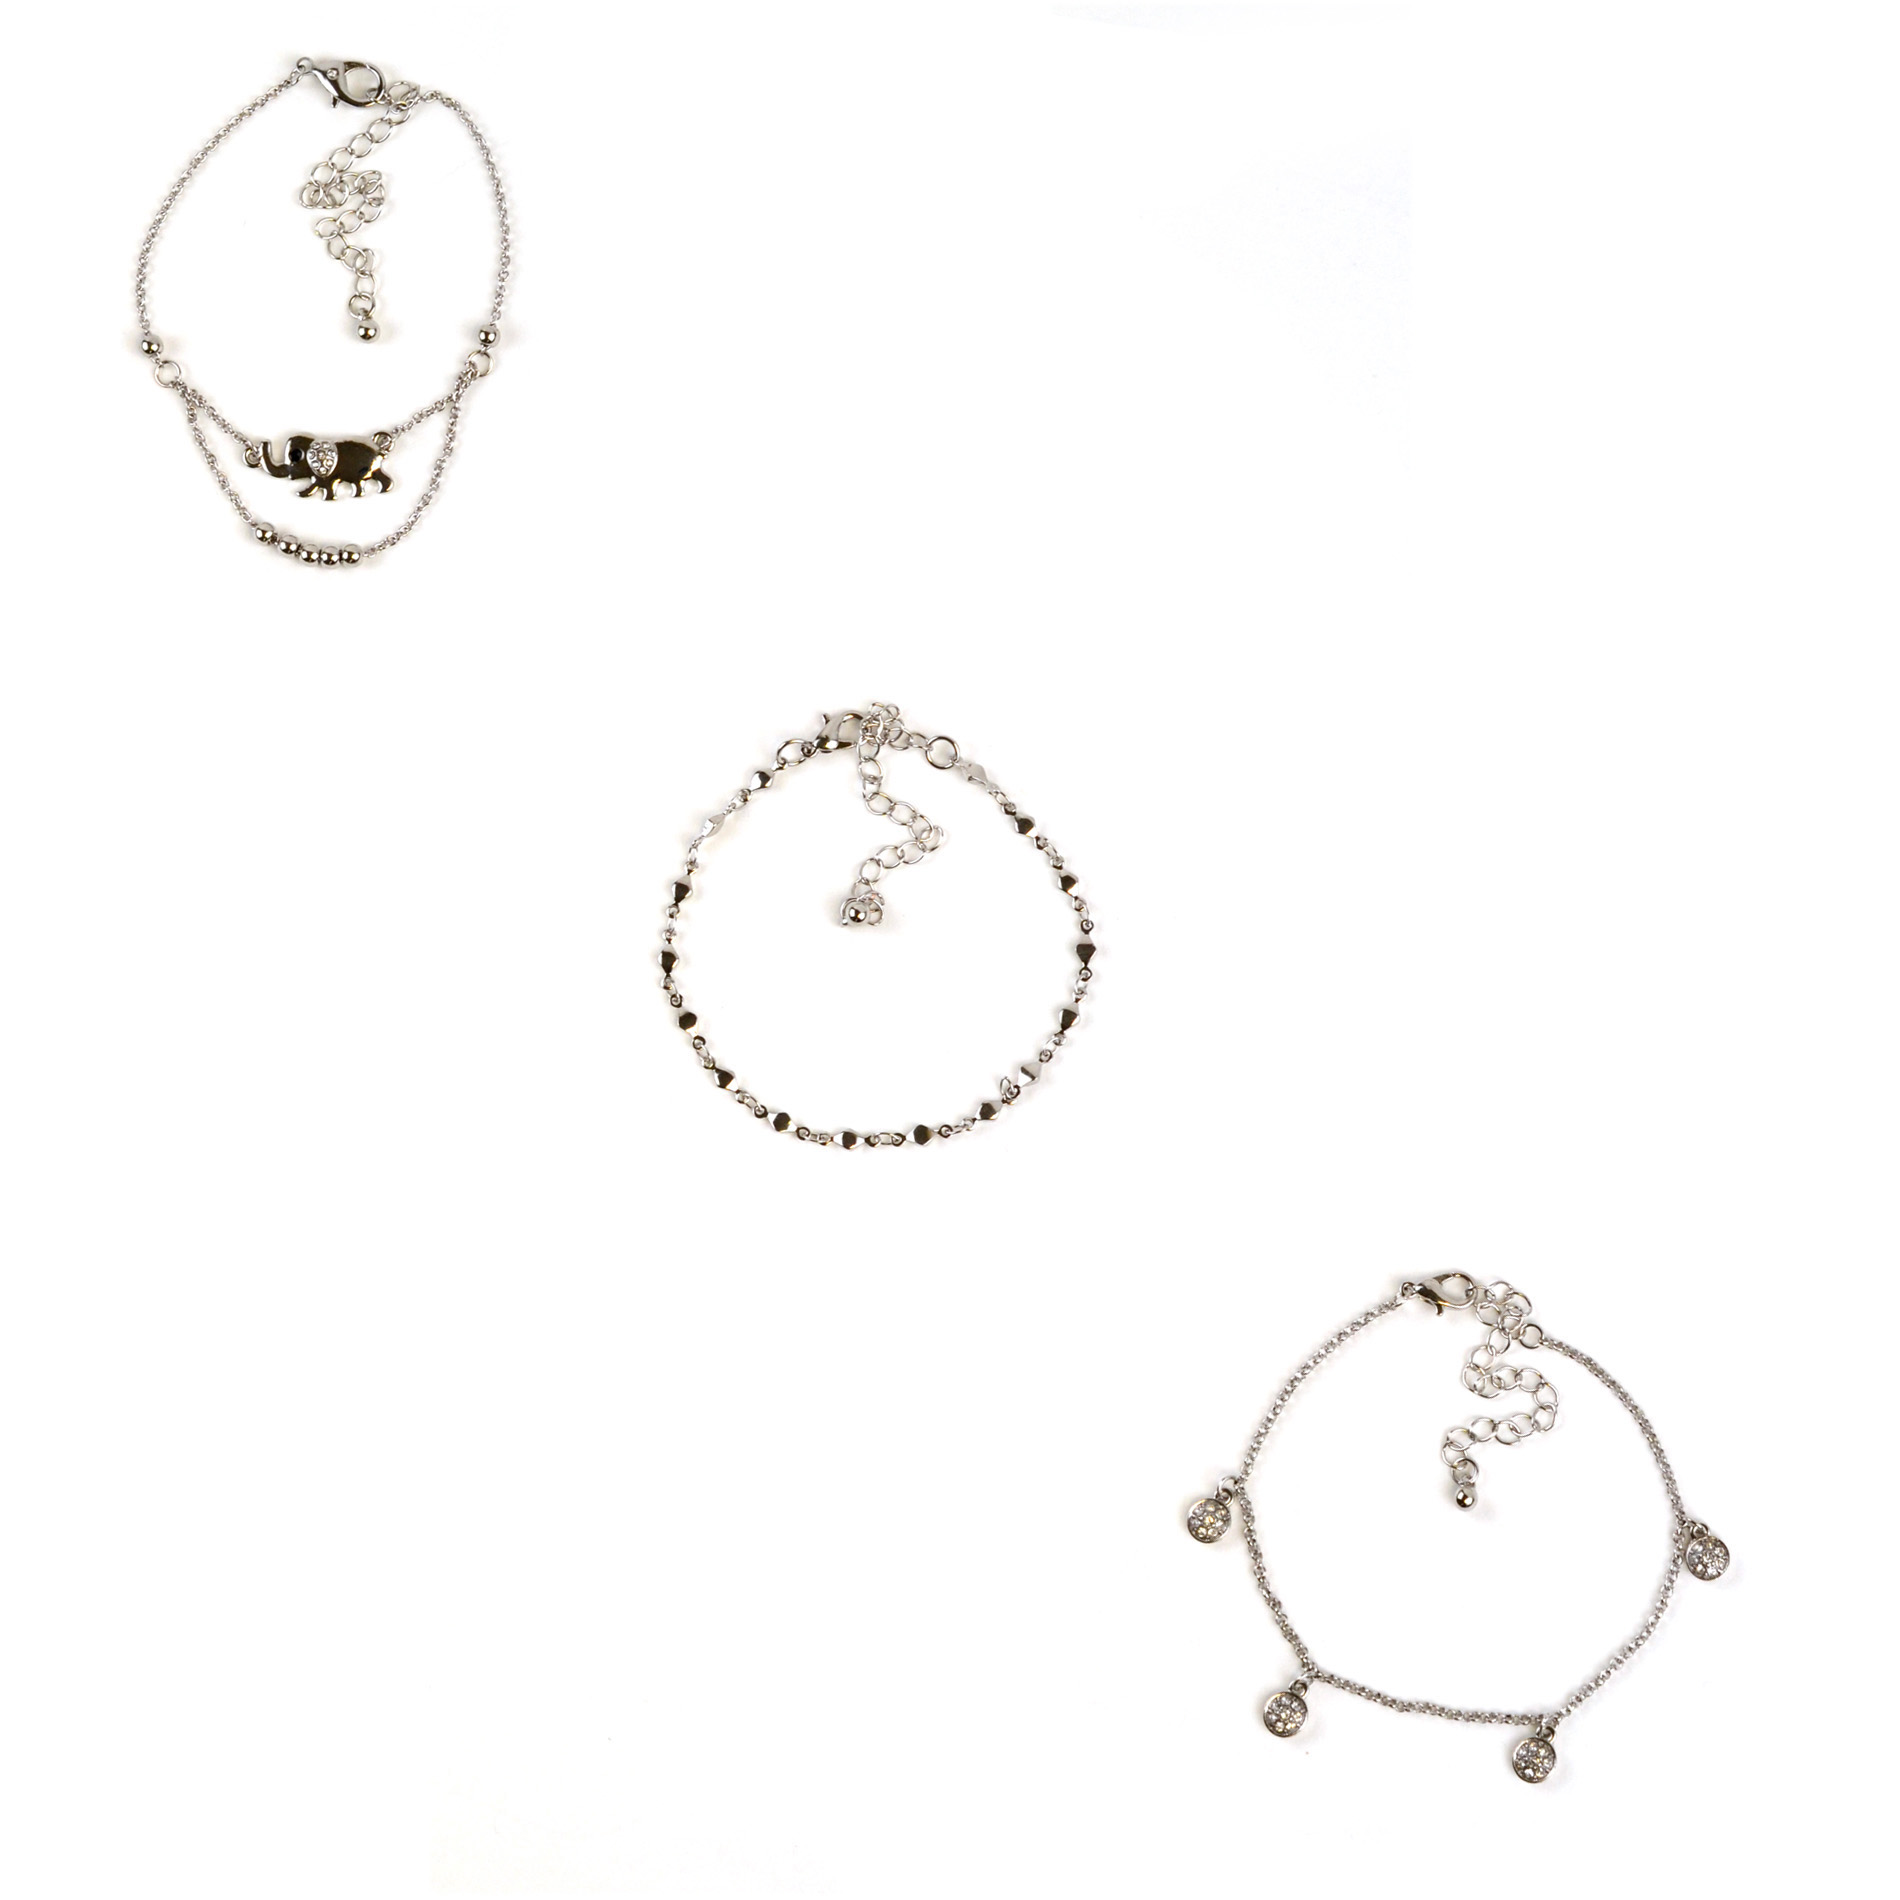 Attention 3 Silver-Tone Assorted Chain Anklet Set